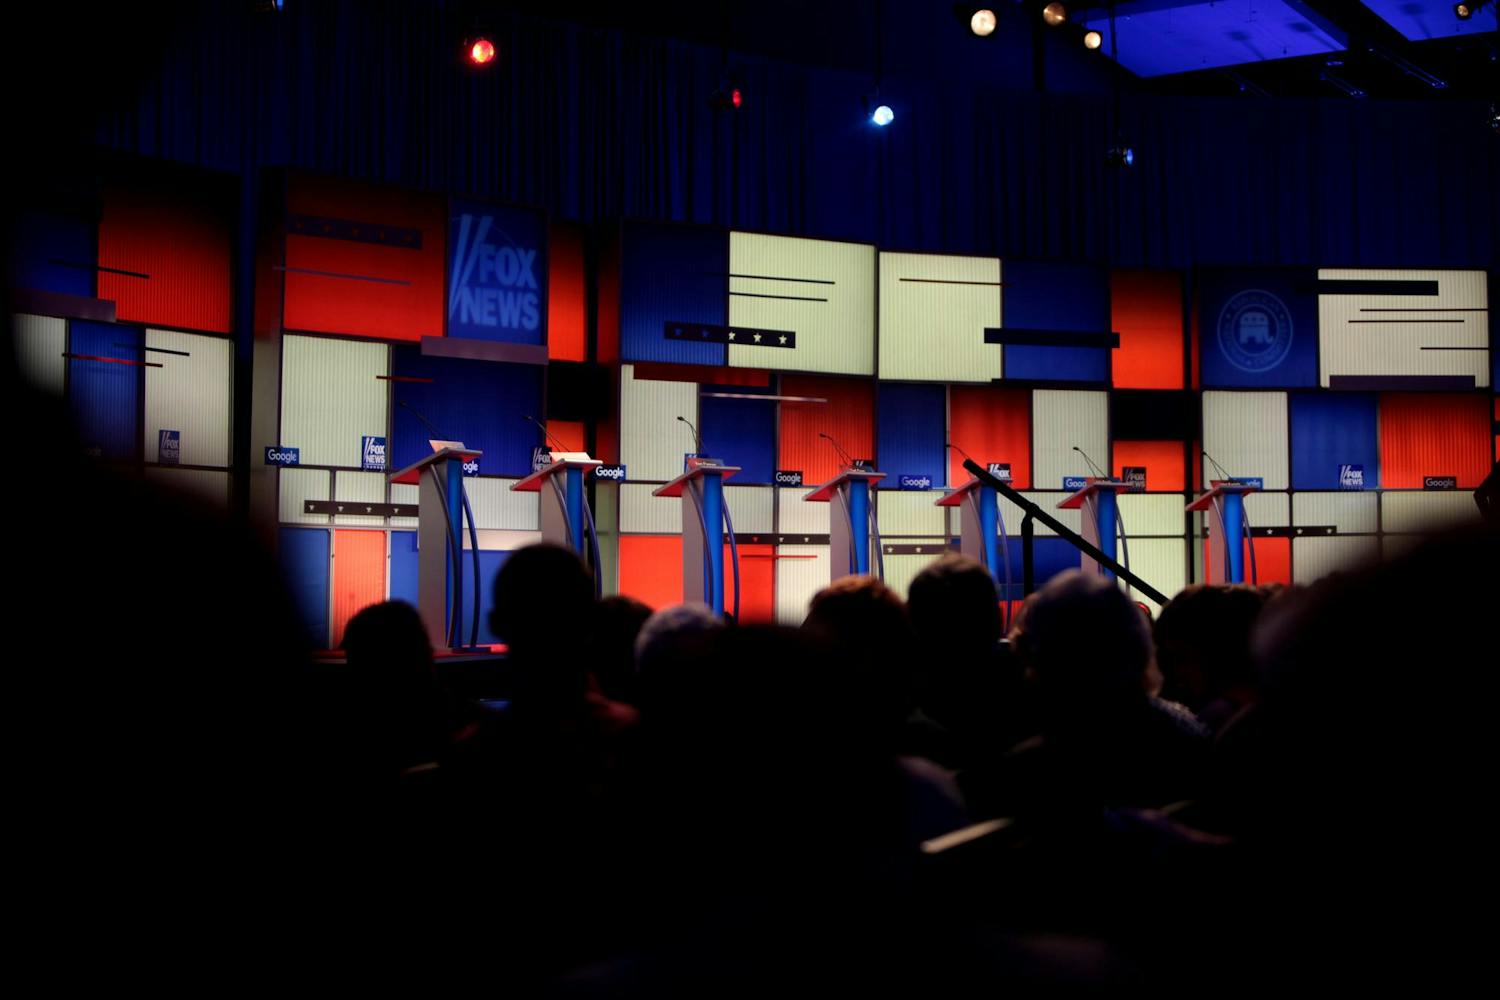 A Republican debate stage is pictured.